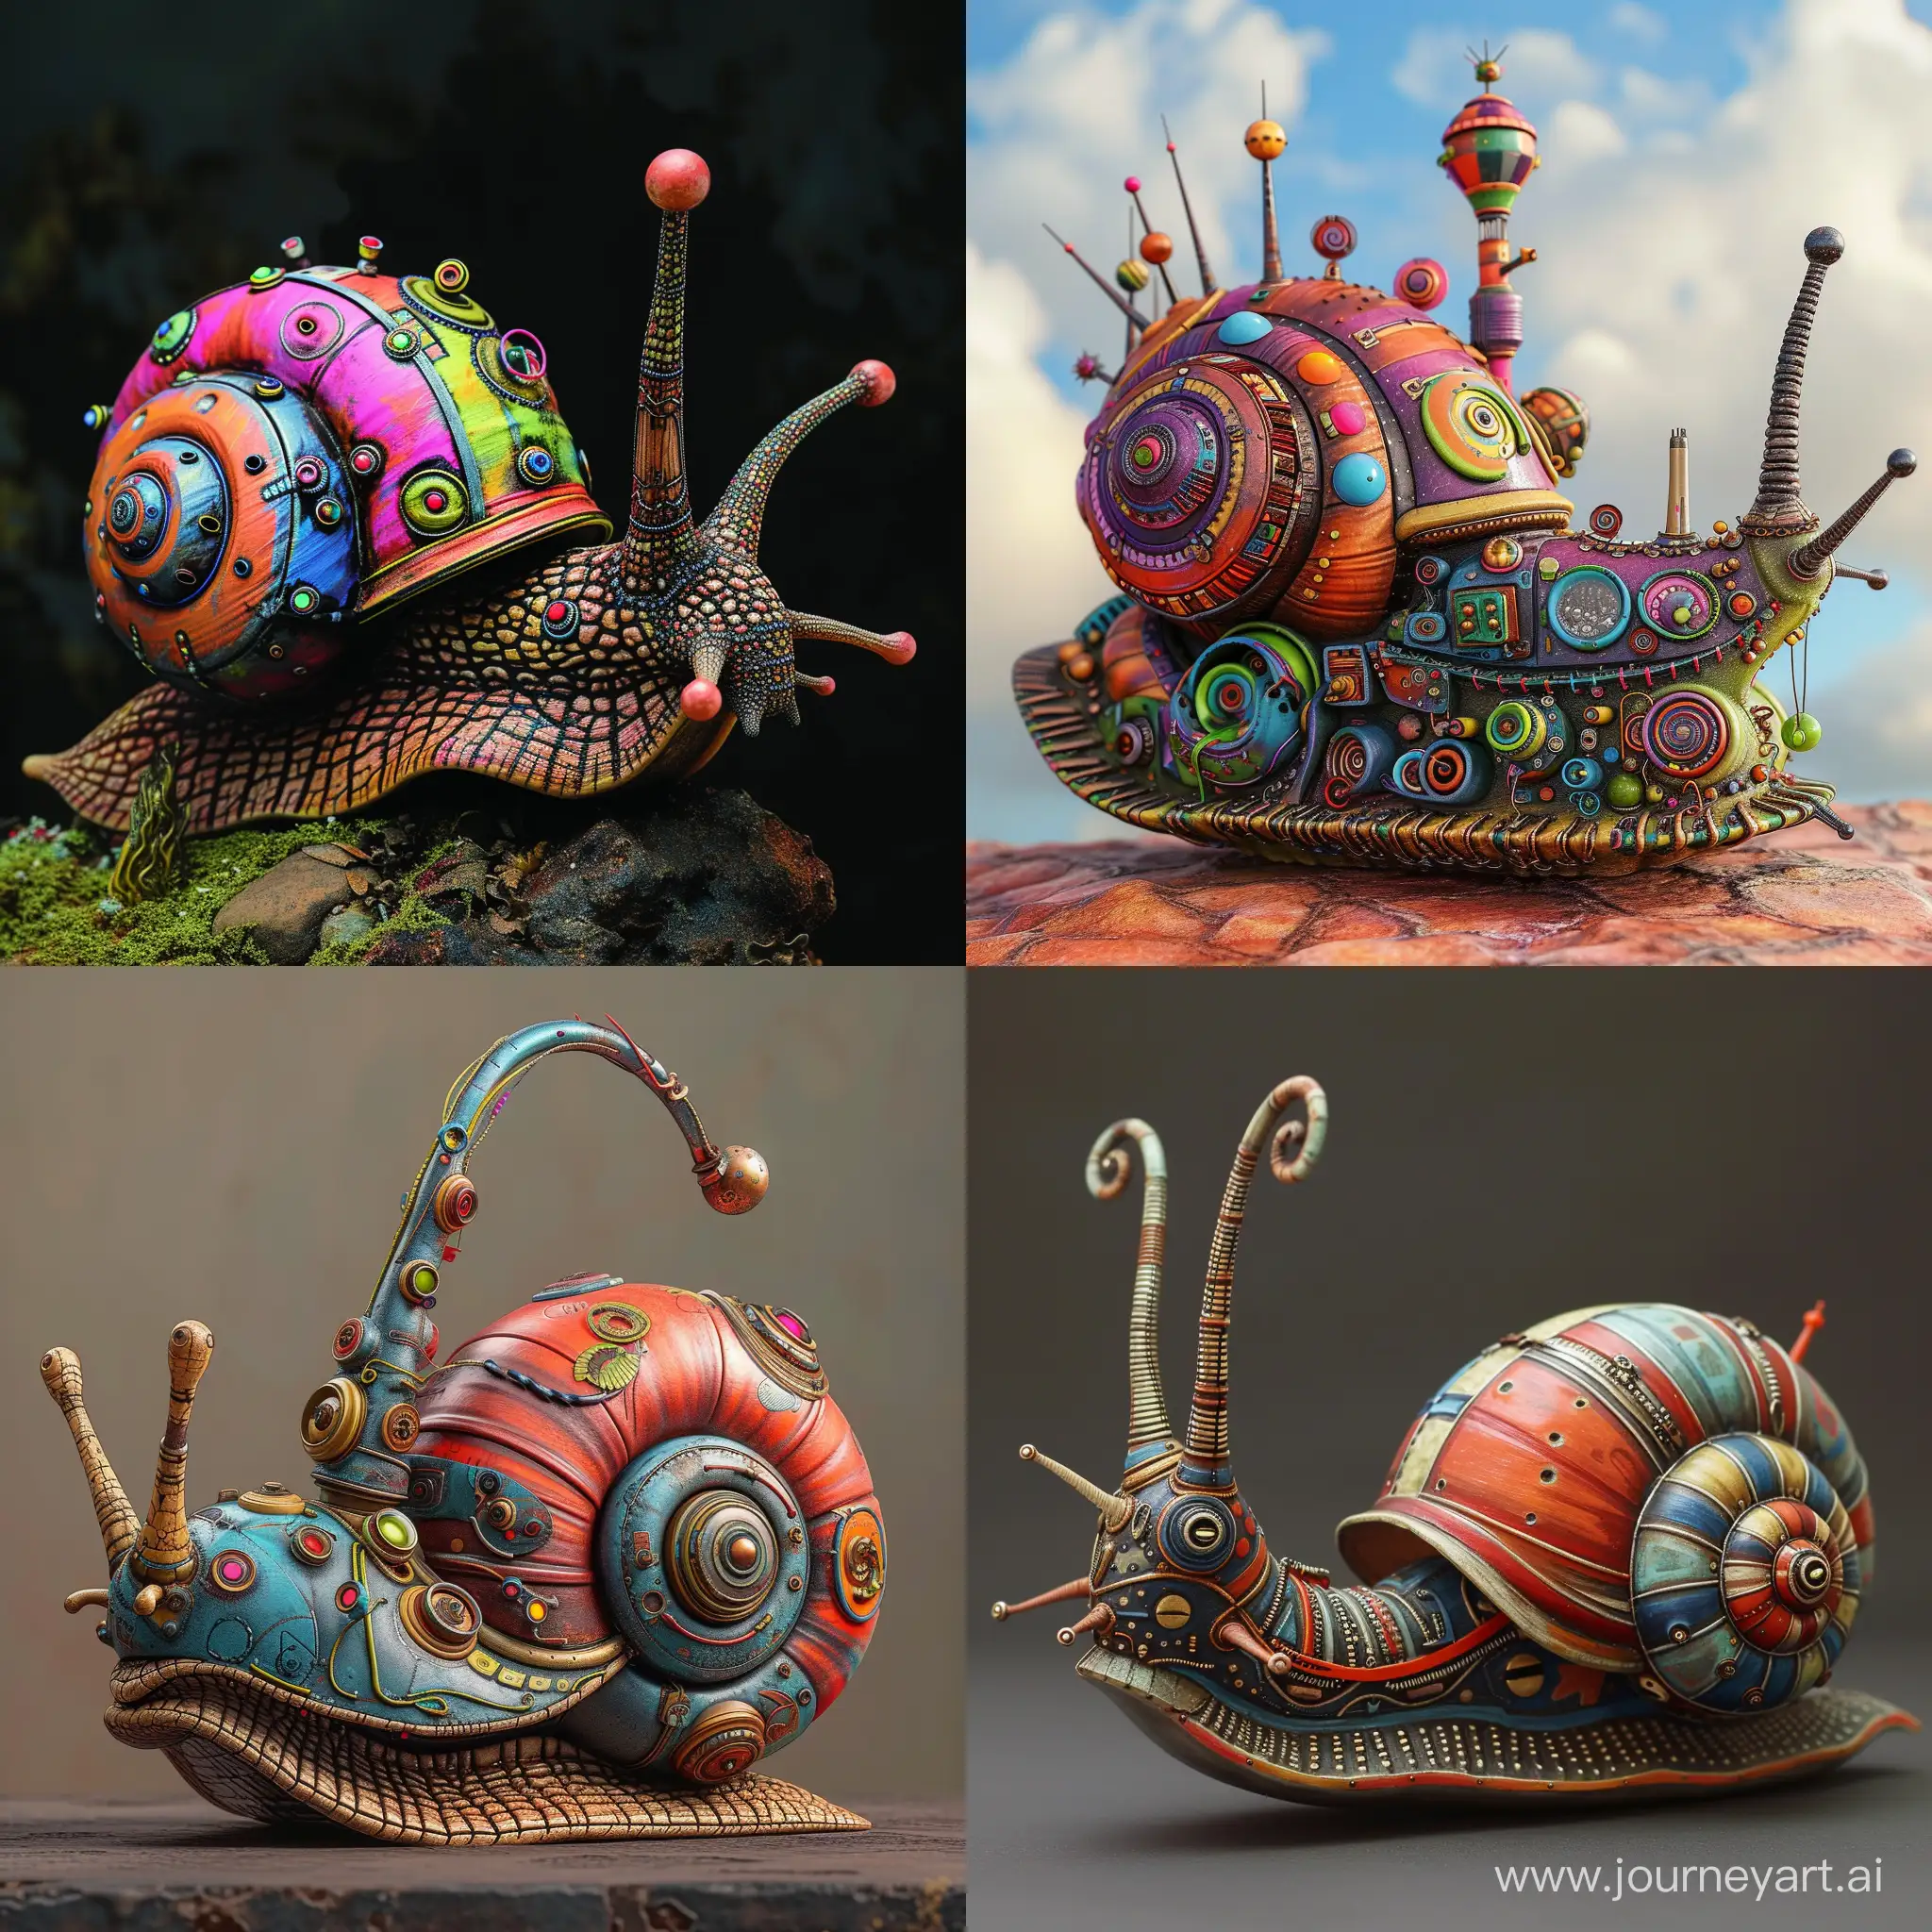 a mechanical snail, colorful, whimsical